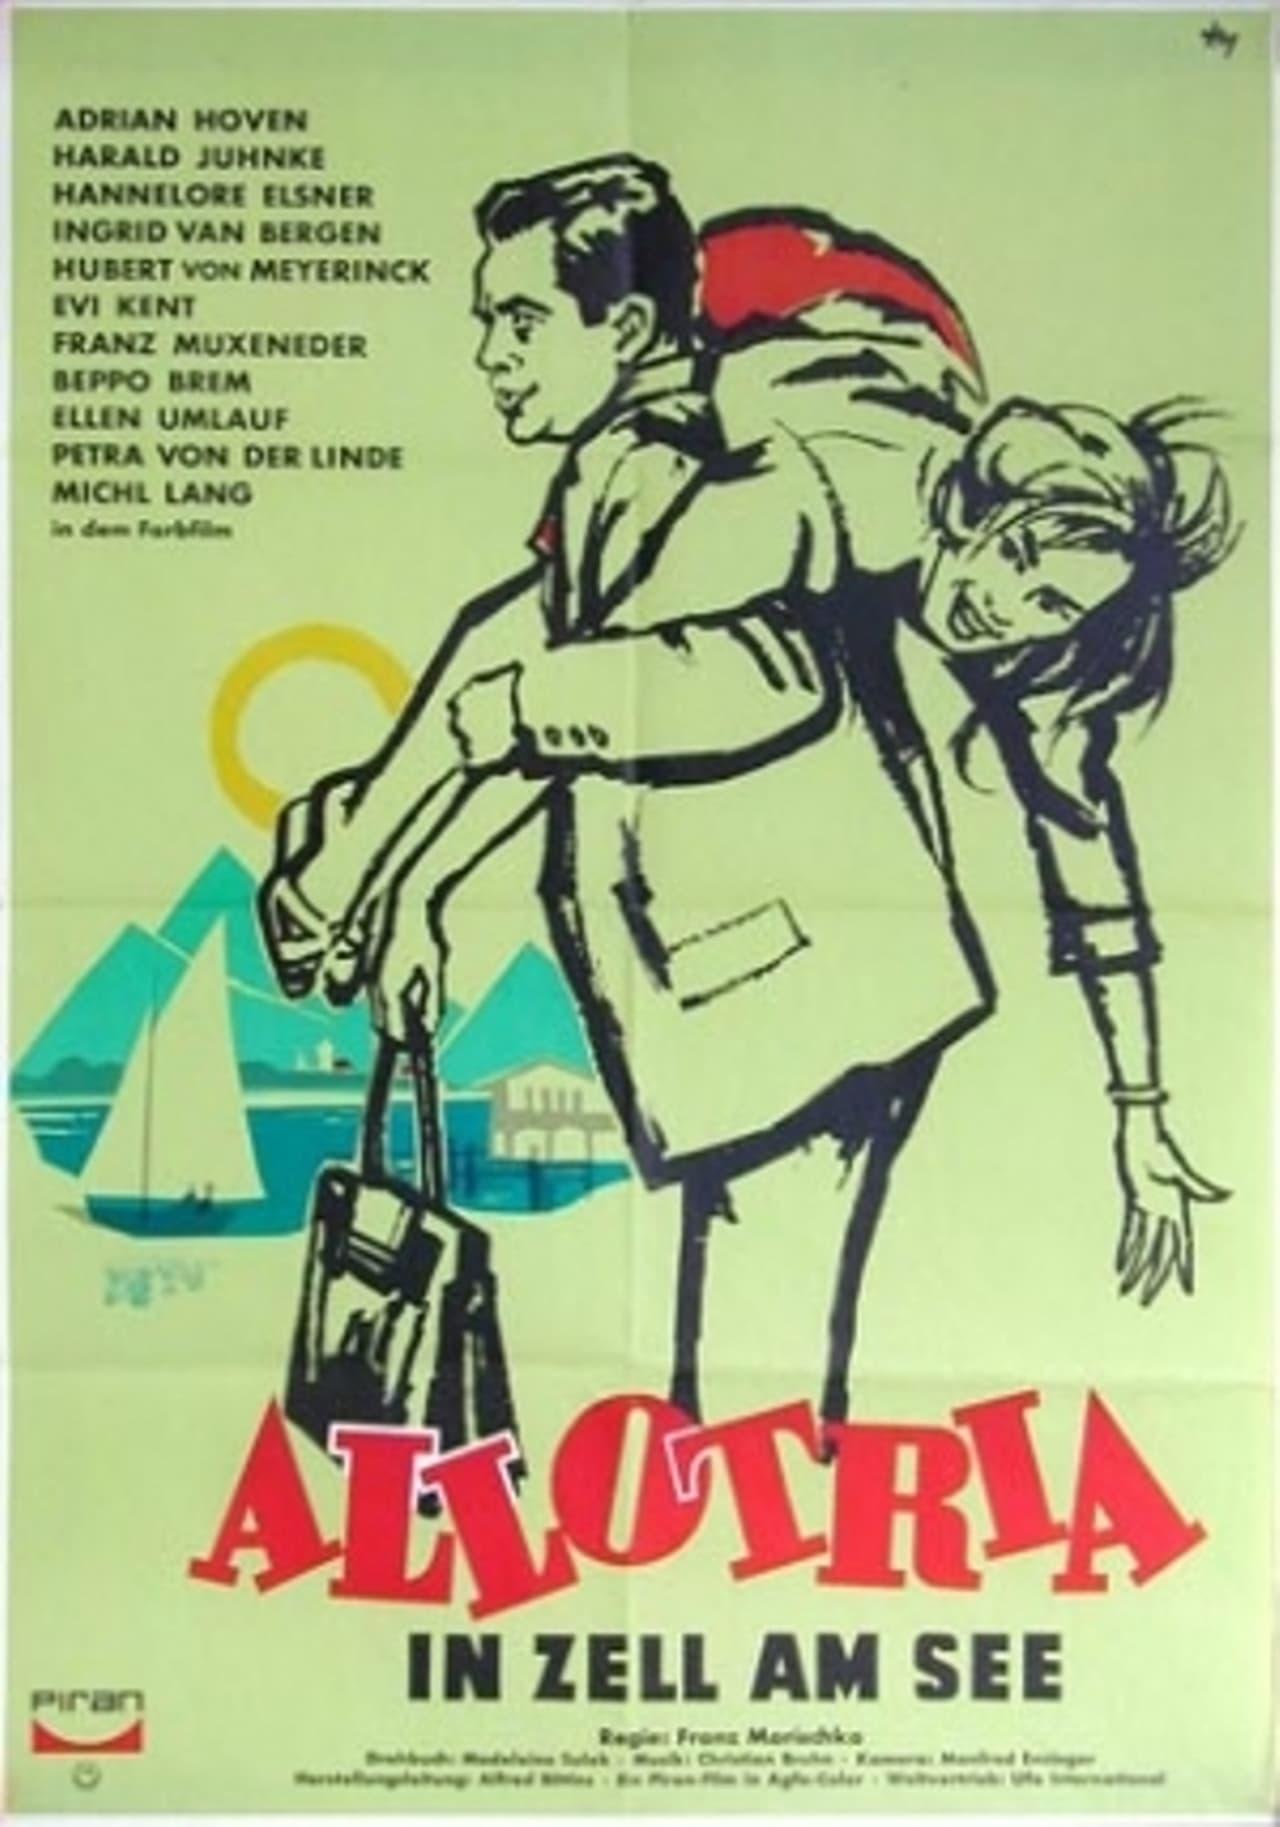 Allotria in Zell am See poster